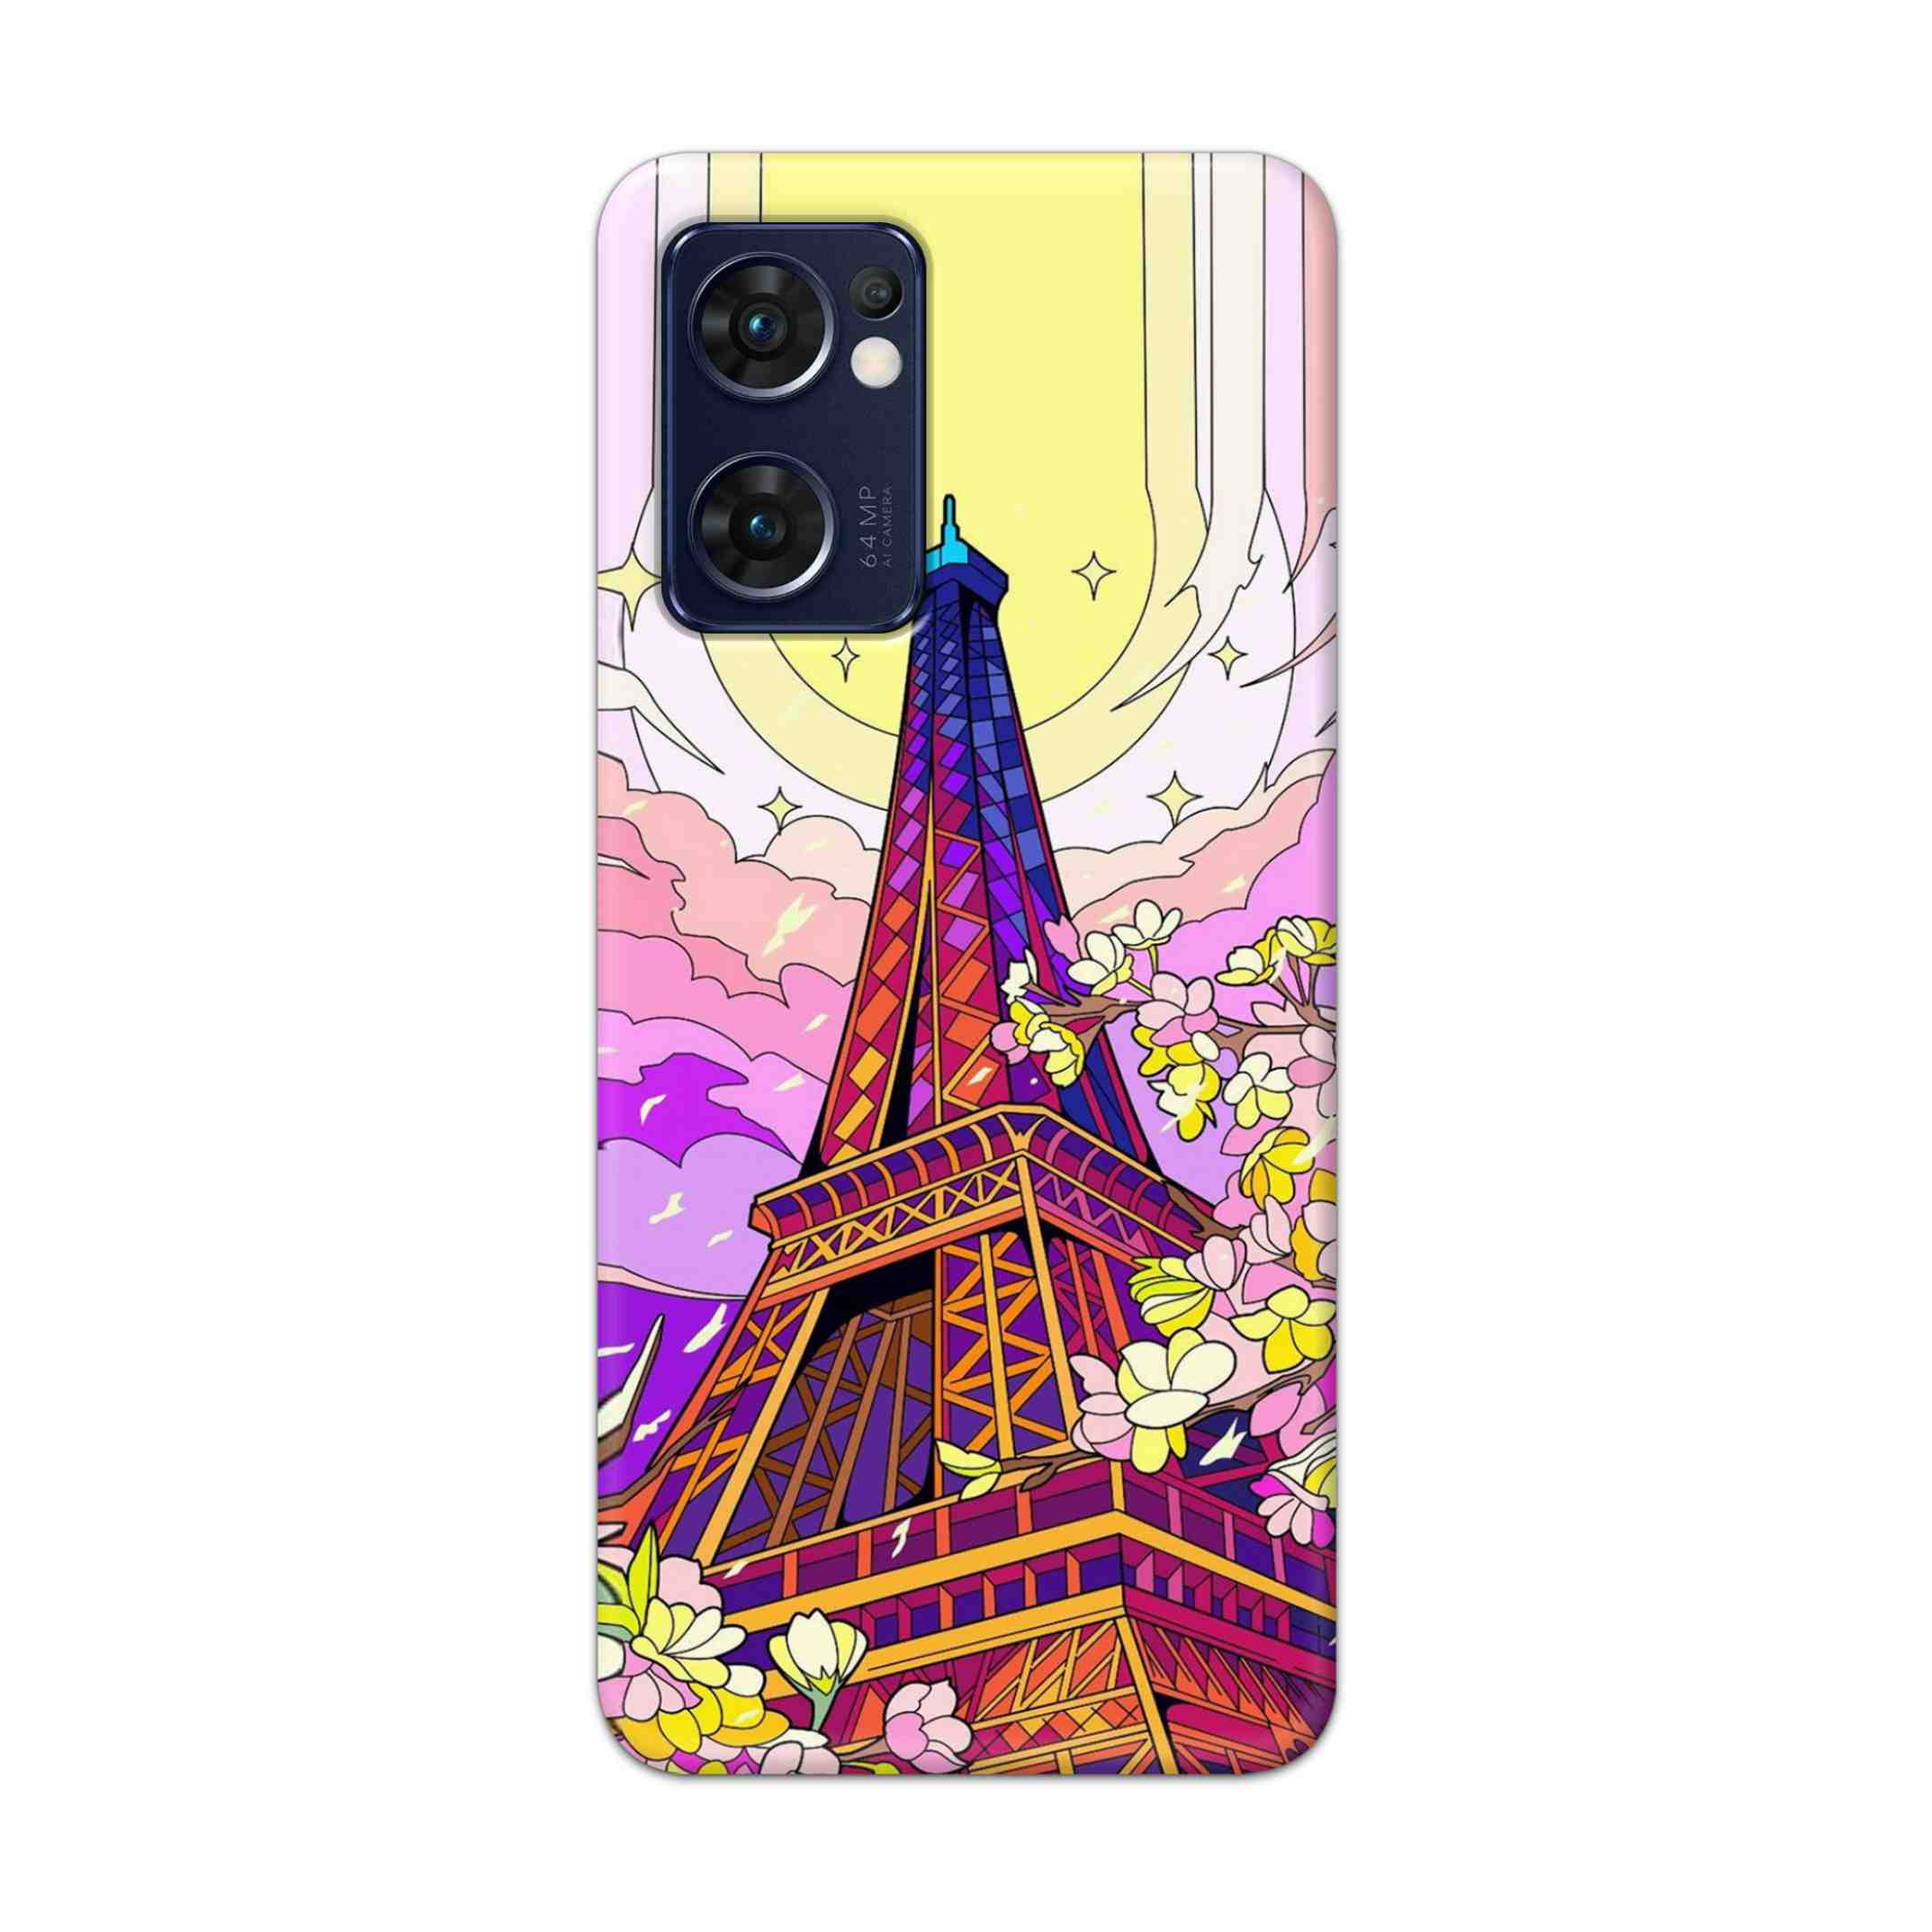 Buy Eiffel Tower Hard Back Mobile Phone Case Cover For Reno 7 5G Online